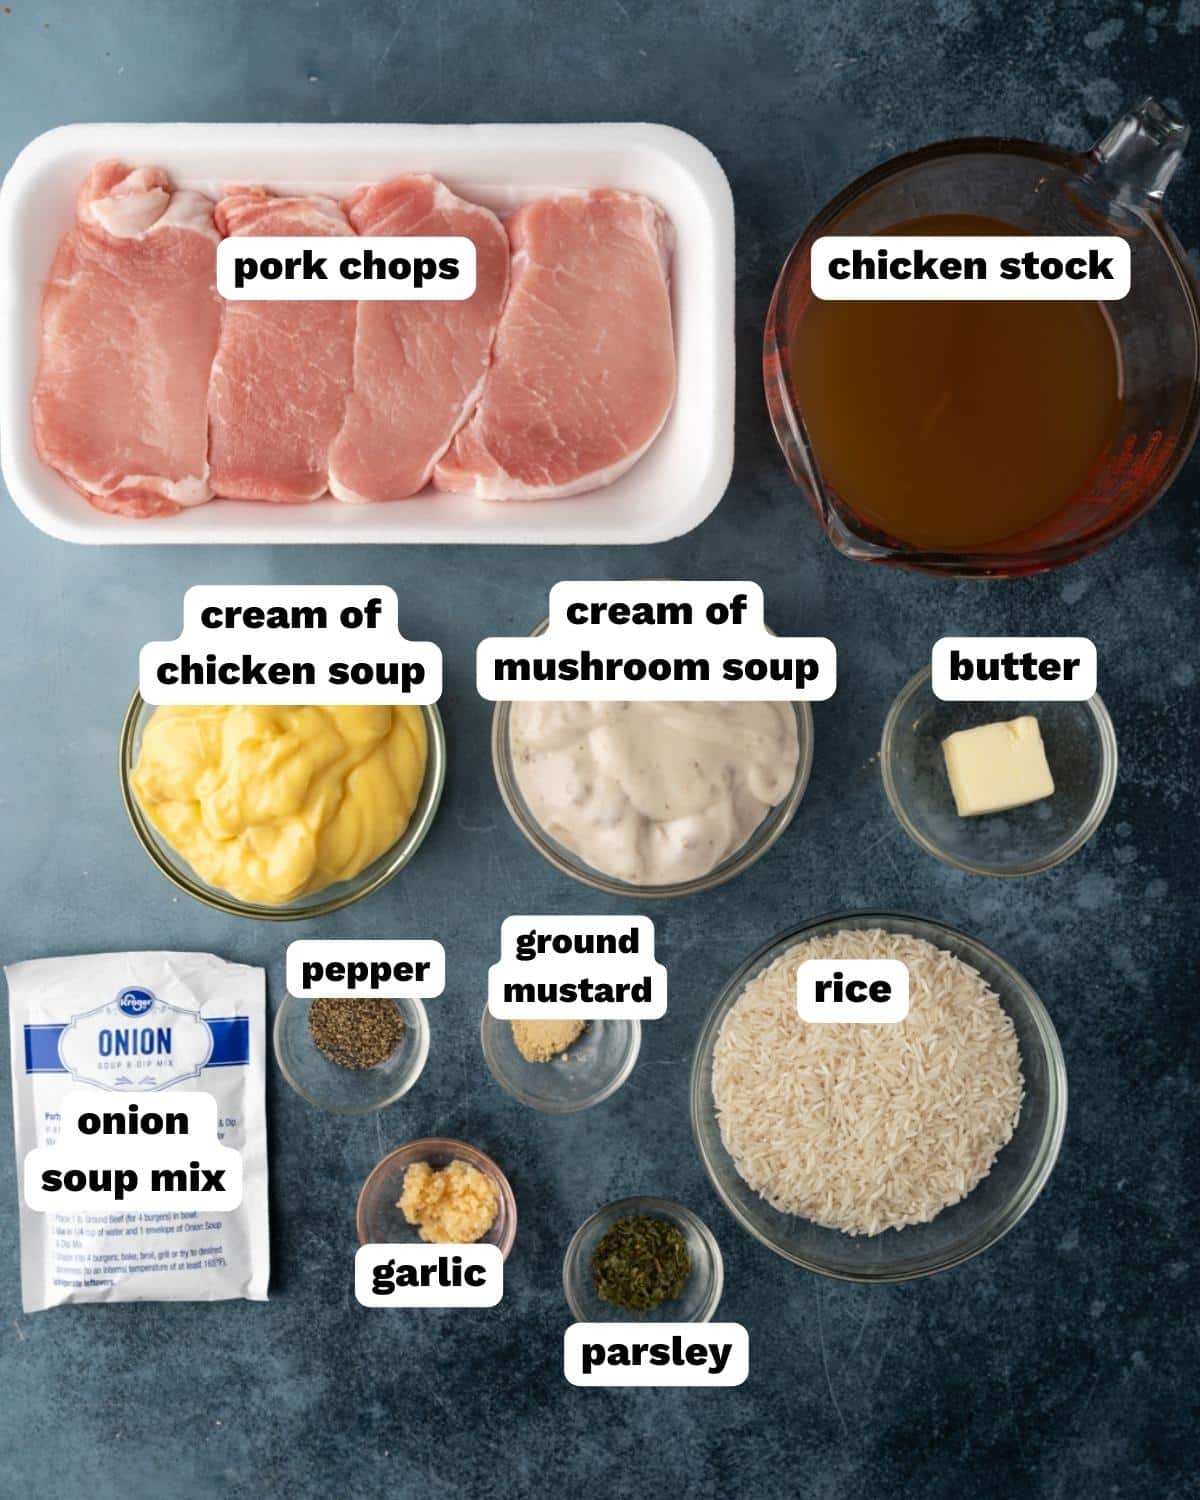 ingredients for pork chops and rice on a table